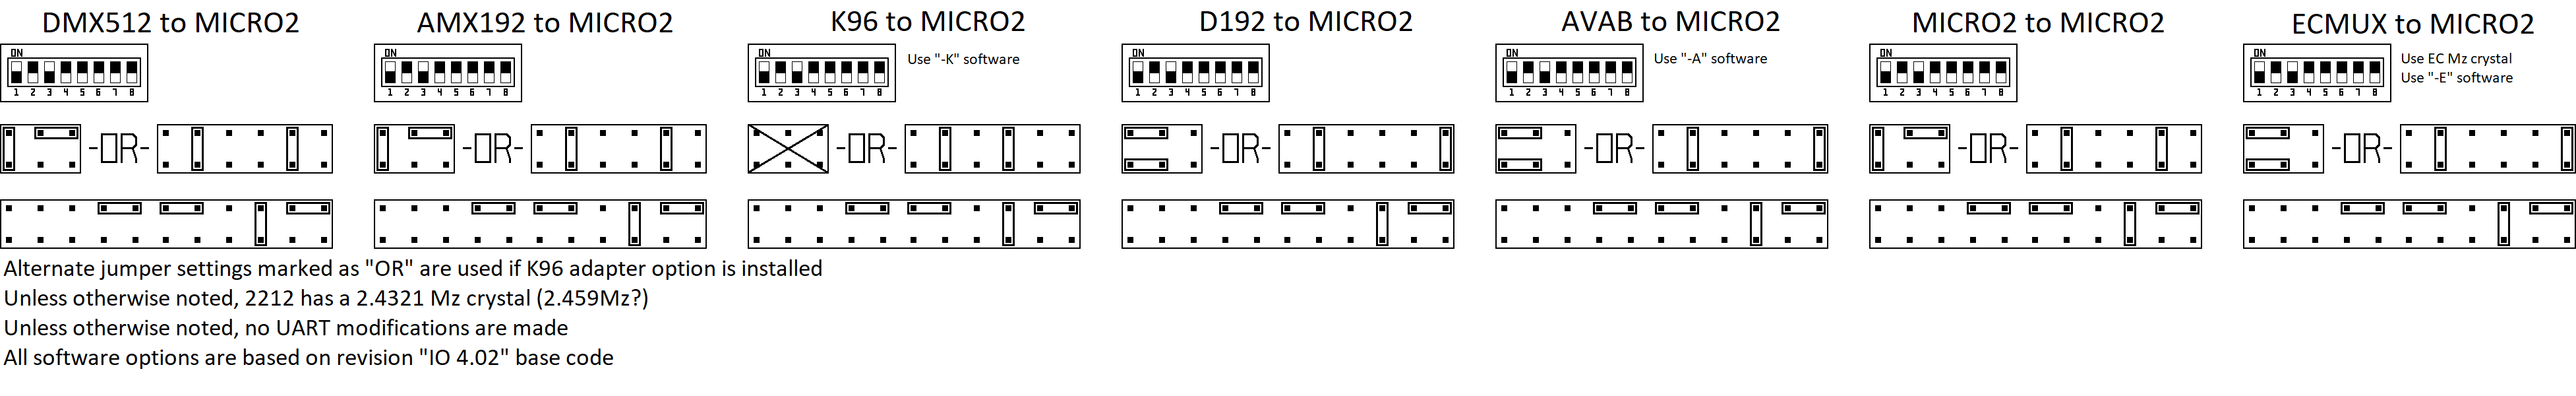 RD2031 Input to MICRO2.png